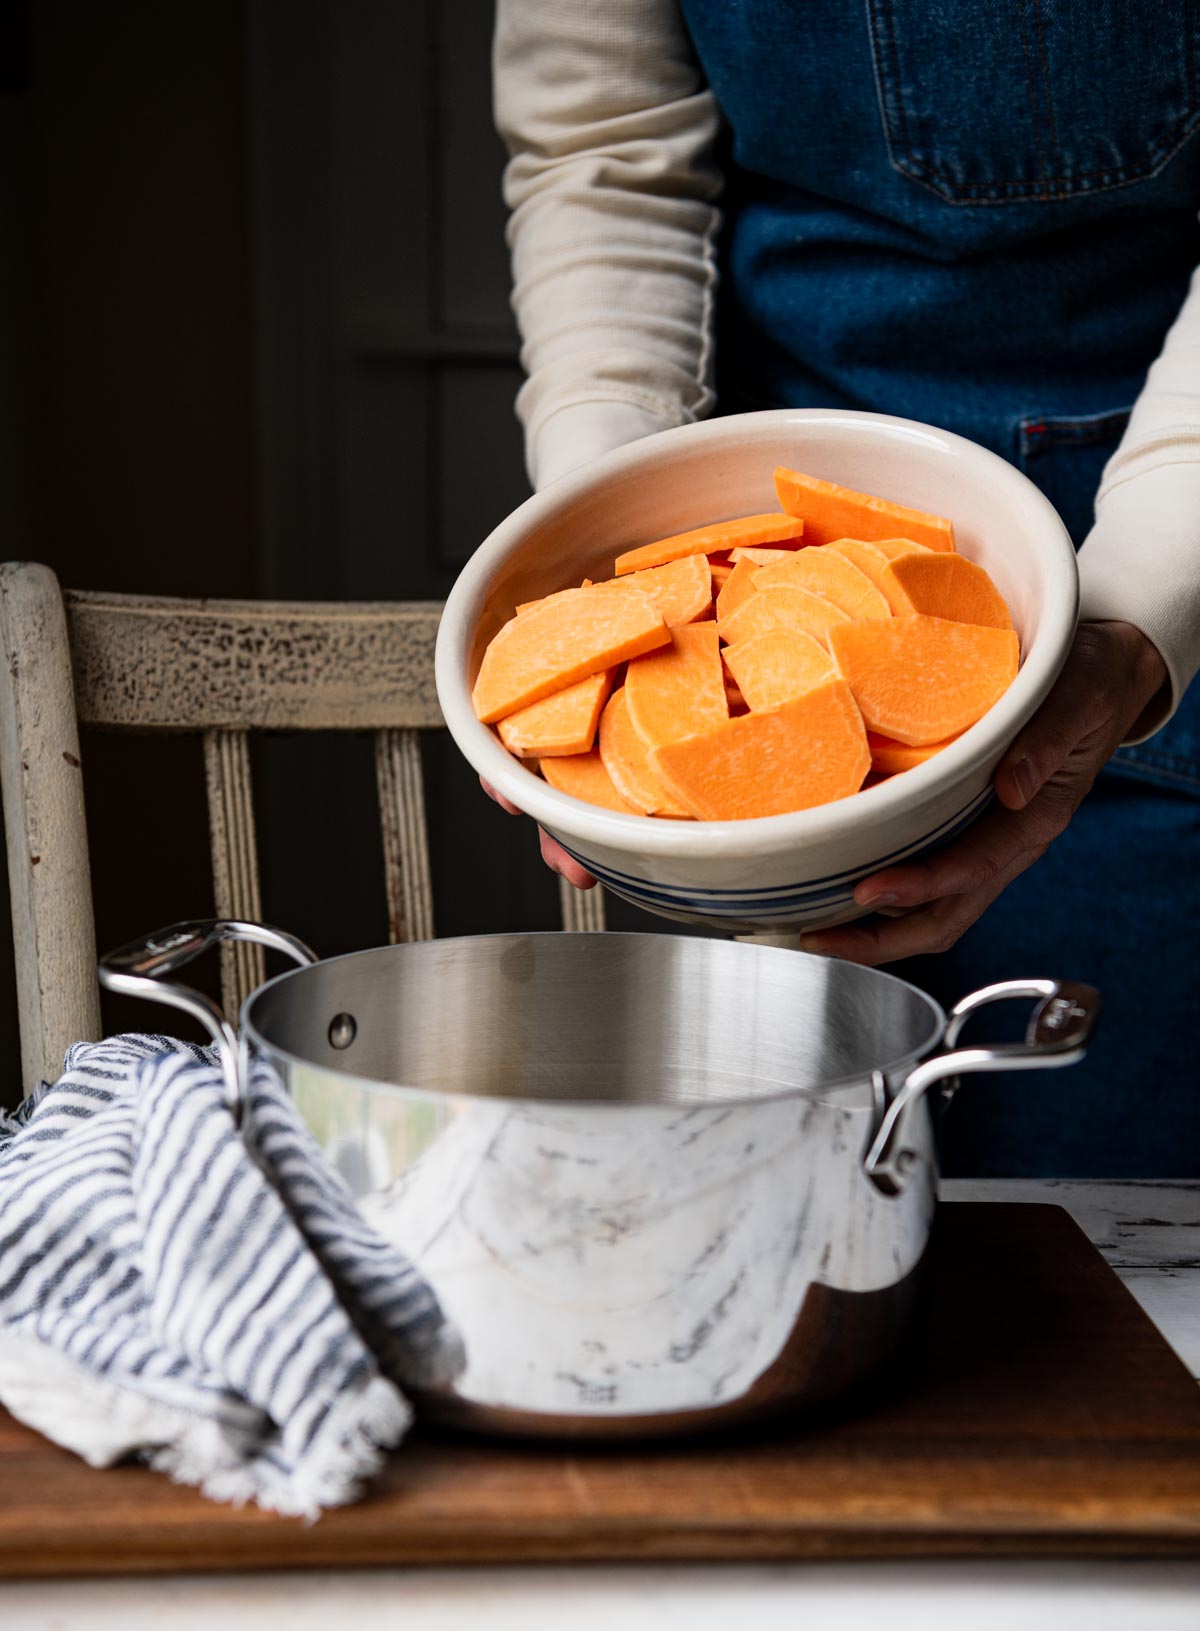 Cooking sweet potatoes for a casserole